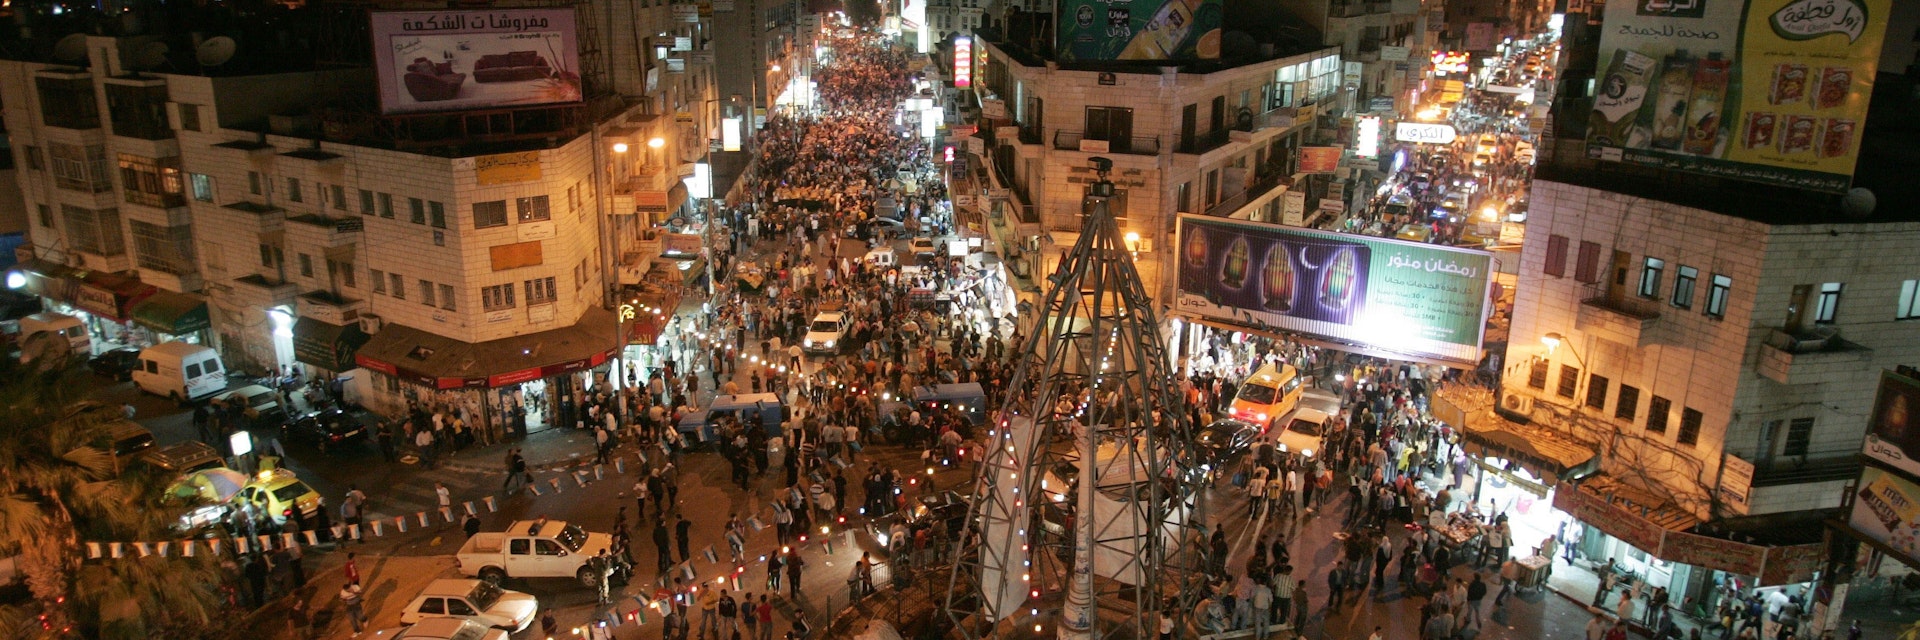 West Bank city of Ramallah, Palestinians in the streets at evening on the last day of the holy month of Ramadan